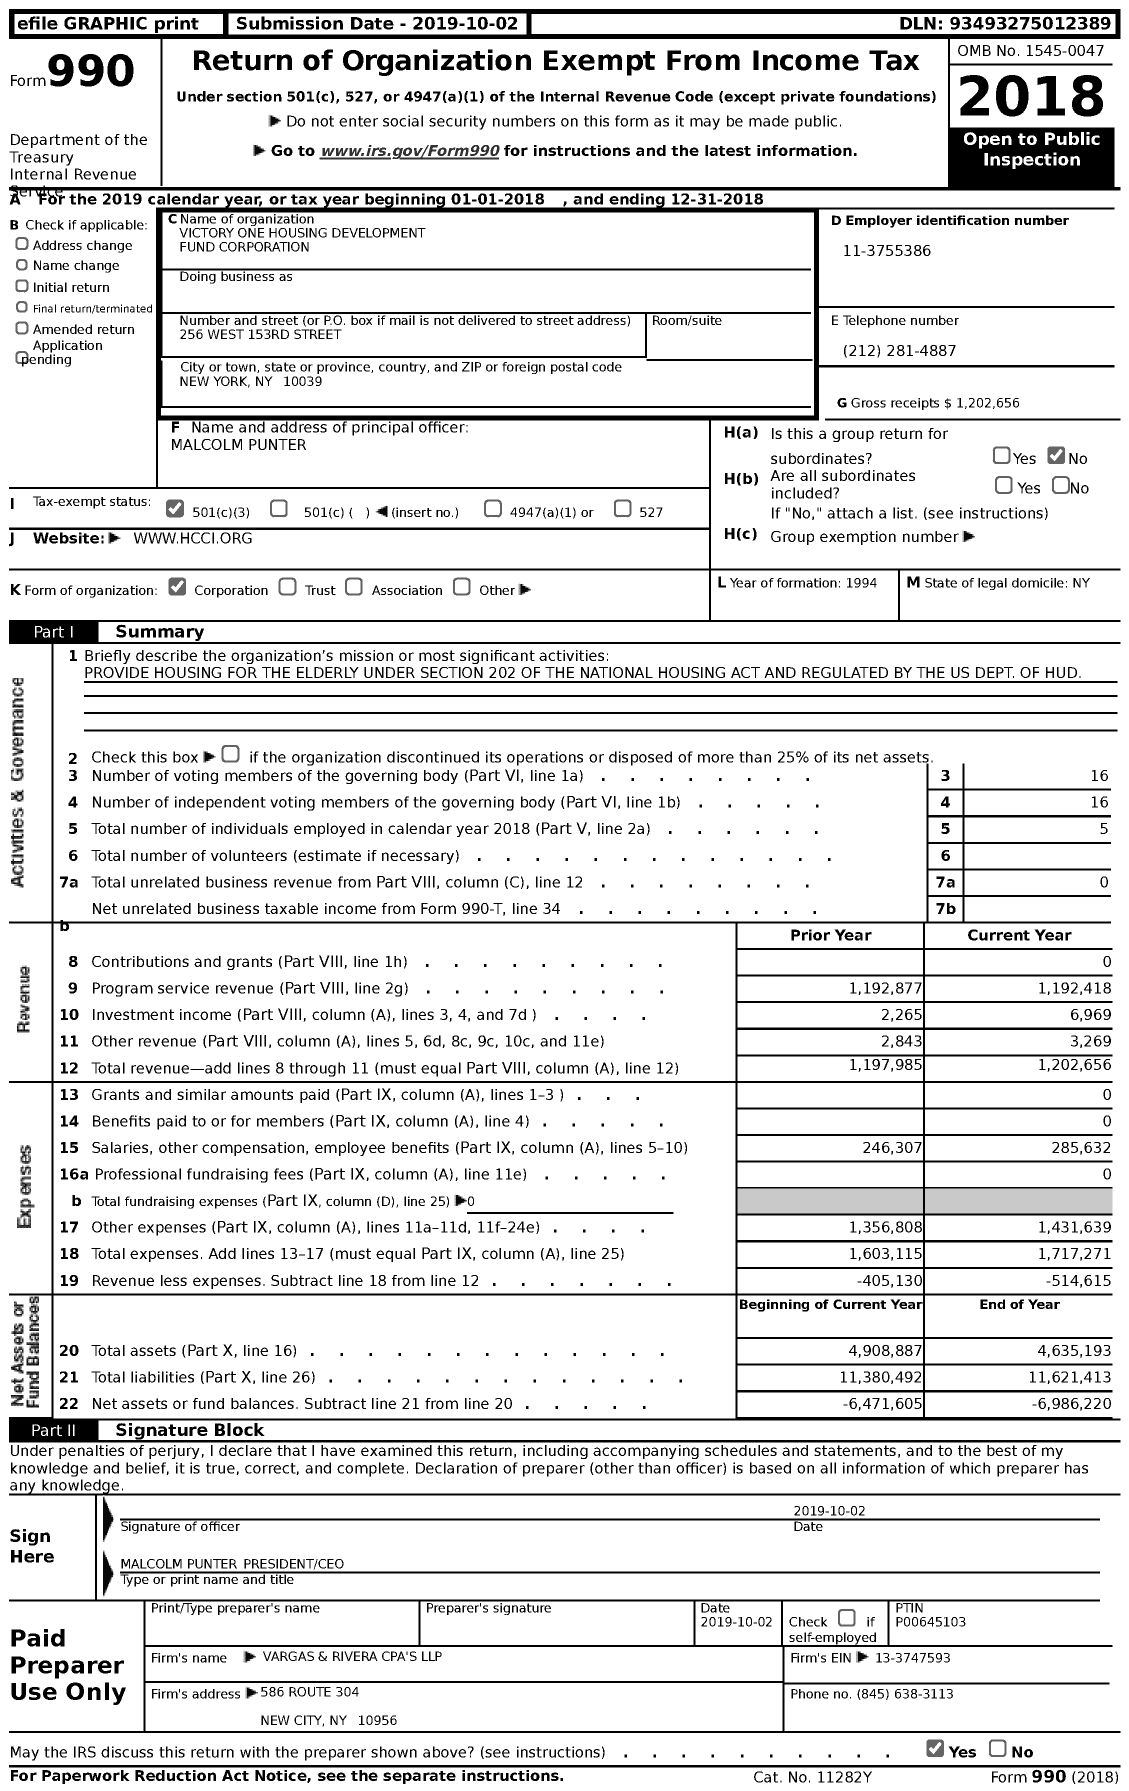 Image of first page of 2018 Form 990 for Victory One Housing Development Fund Corporation